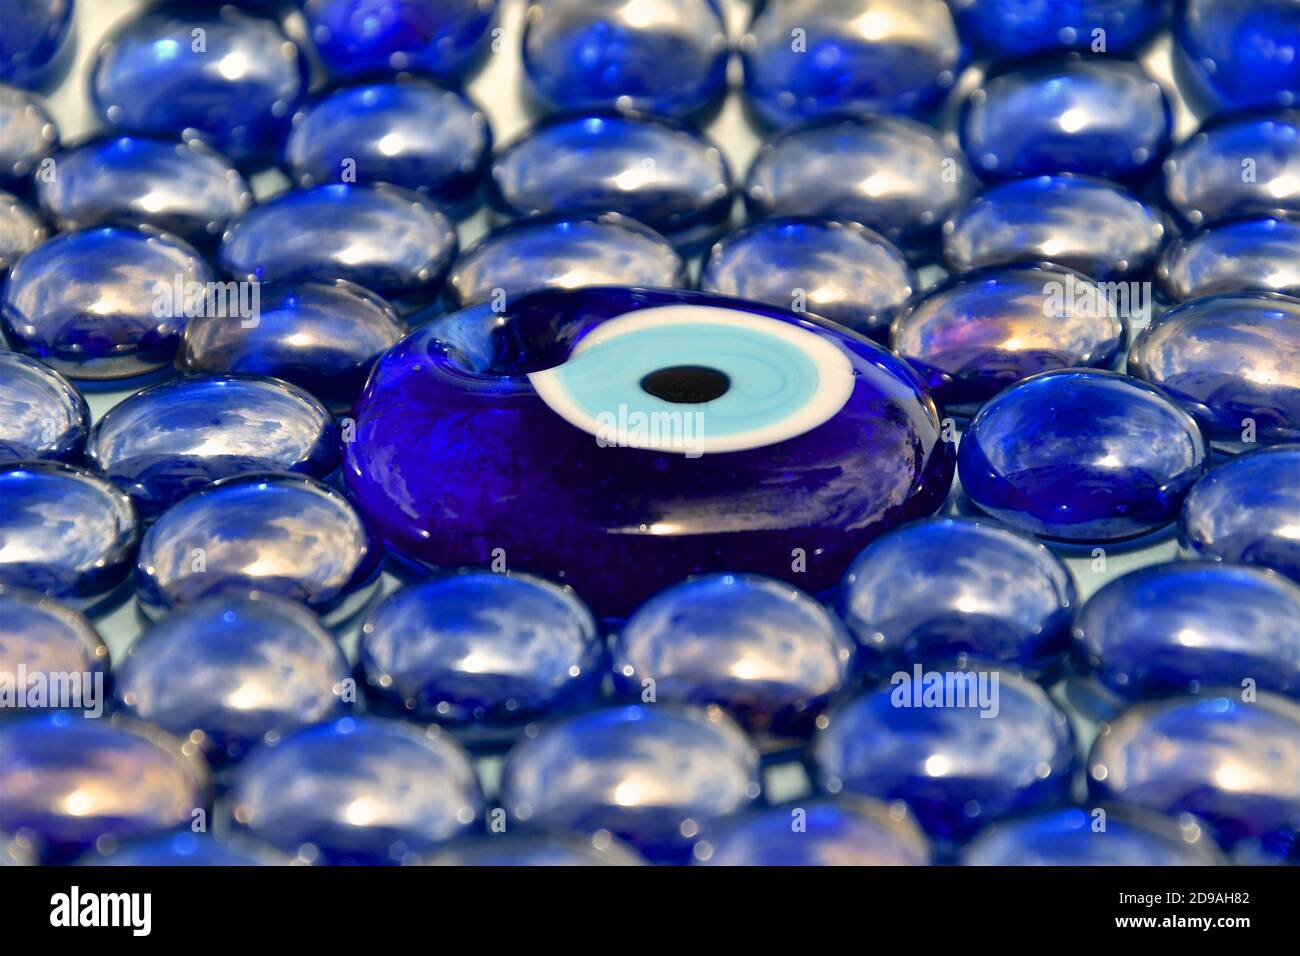 A side perspective view of shiny irridescent blue glass beads with a central peacock design bead Stock Photo